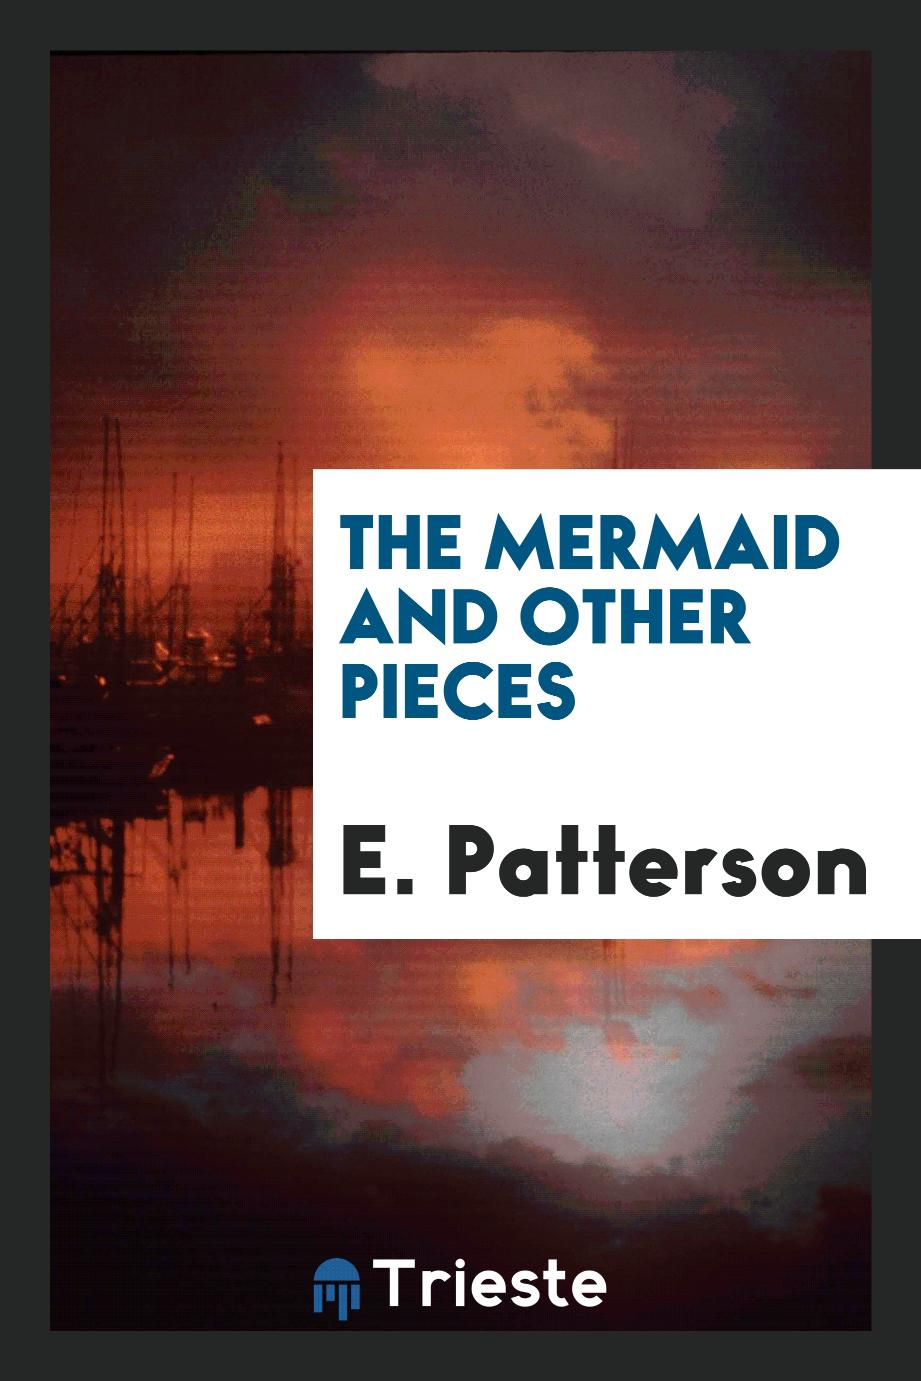 The Mermaid and Other Pieces